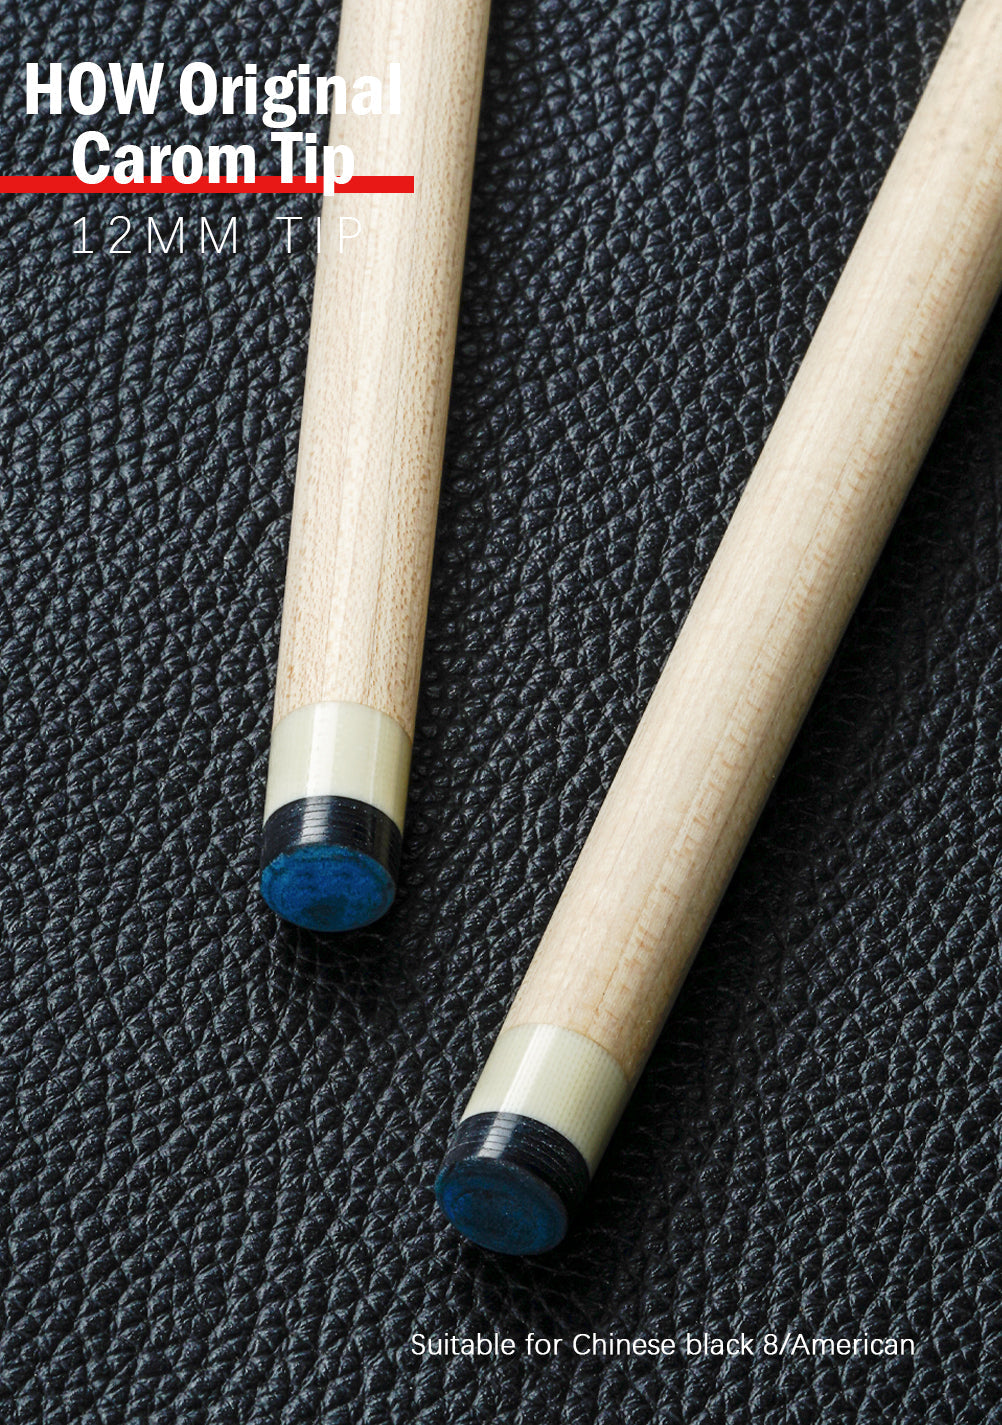 HOW 3CX 3 Cushion Carom Billiard Cue Shaft 12.5mm Tip 10 Pieces in 1 Technology Laminated Low Deflection Real Inlay 69cm Shaft